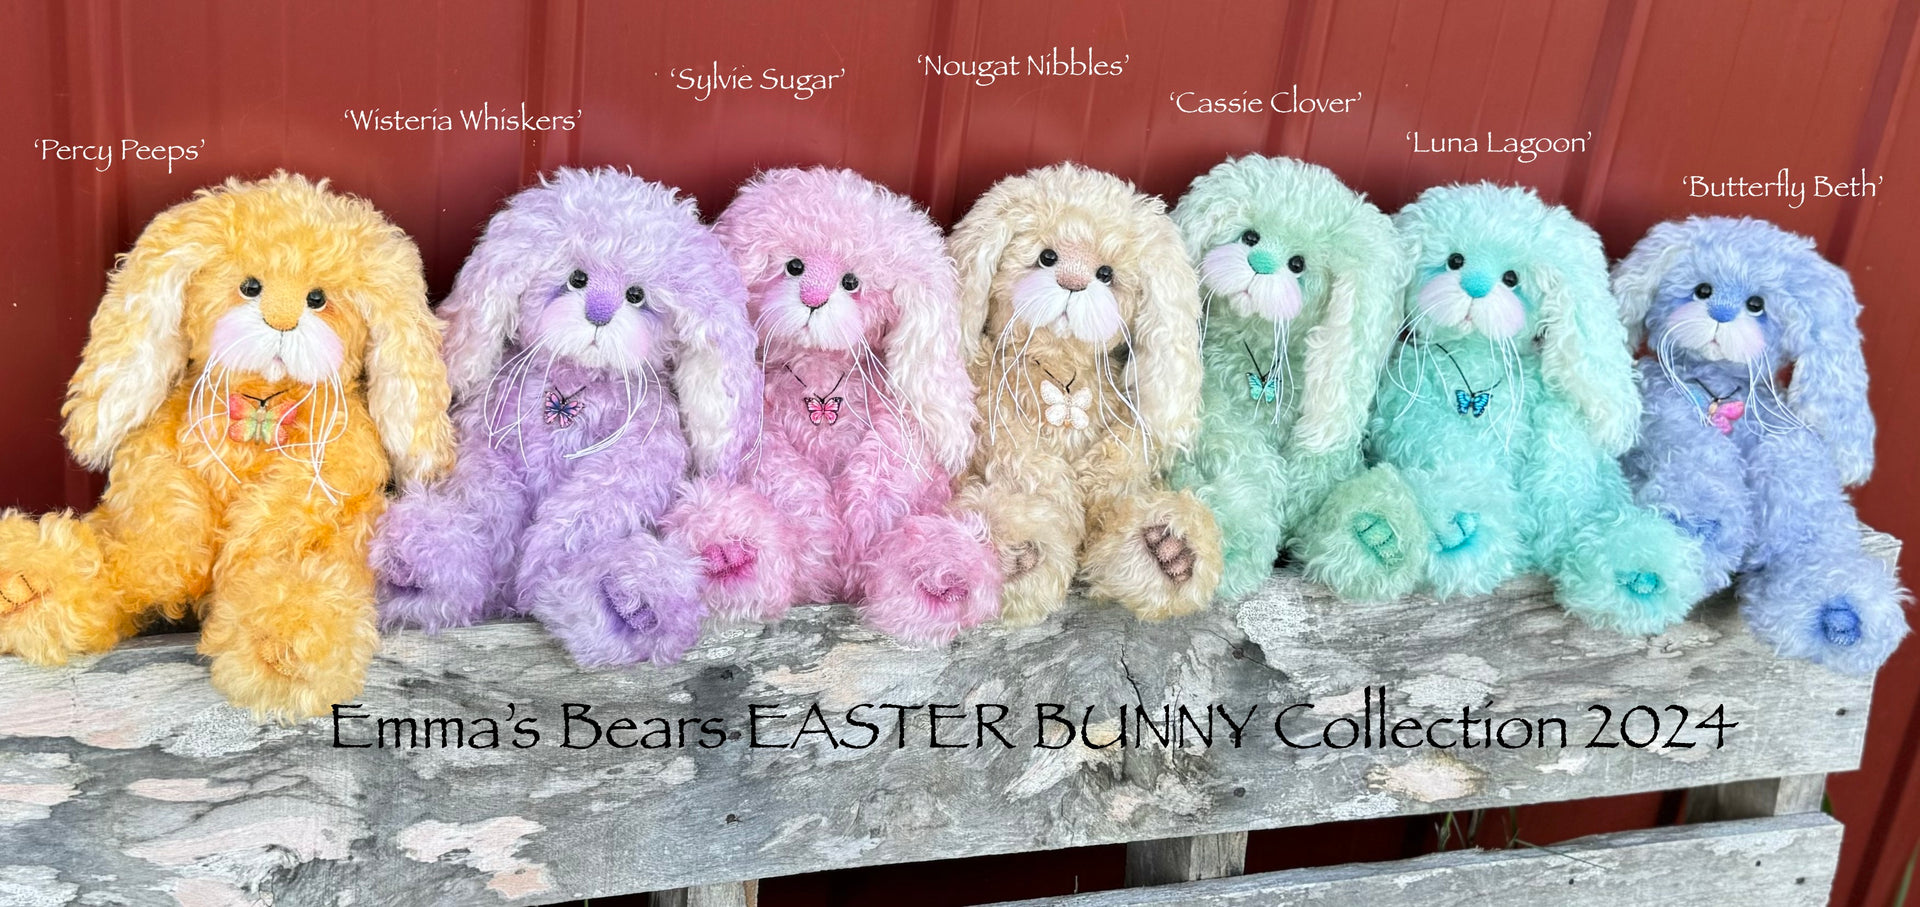 Percy Peeps - 12" Hand-Dyed Kid Mohair EASTER Bunny by Emma's Bears - OOAK